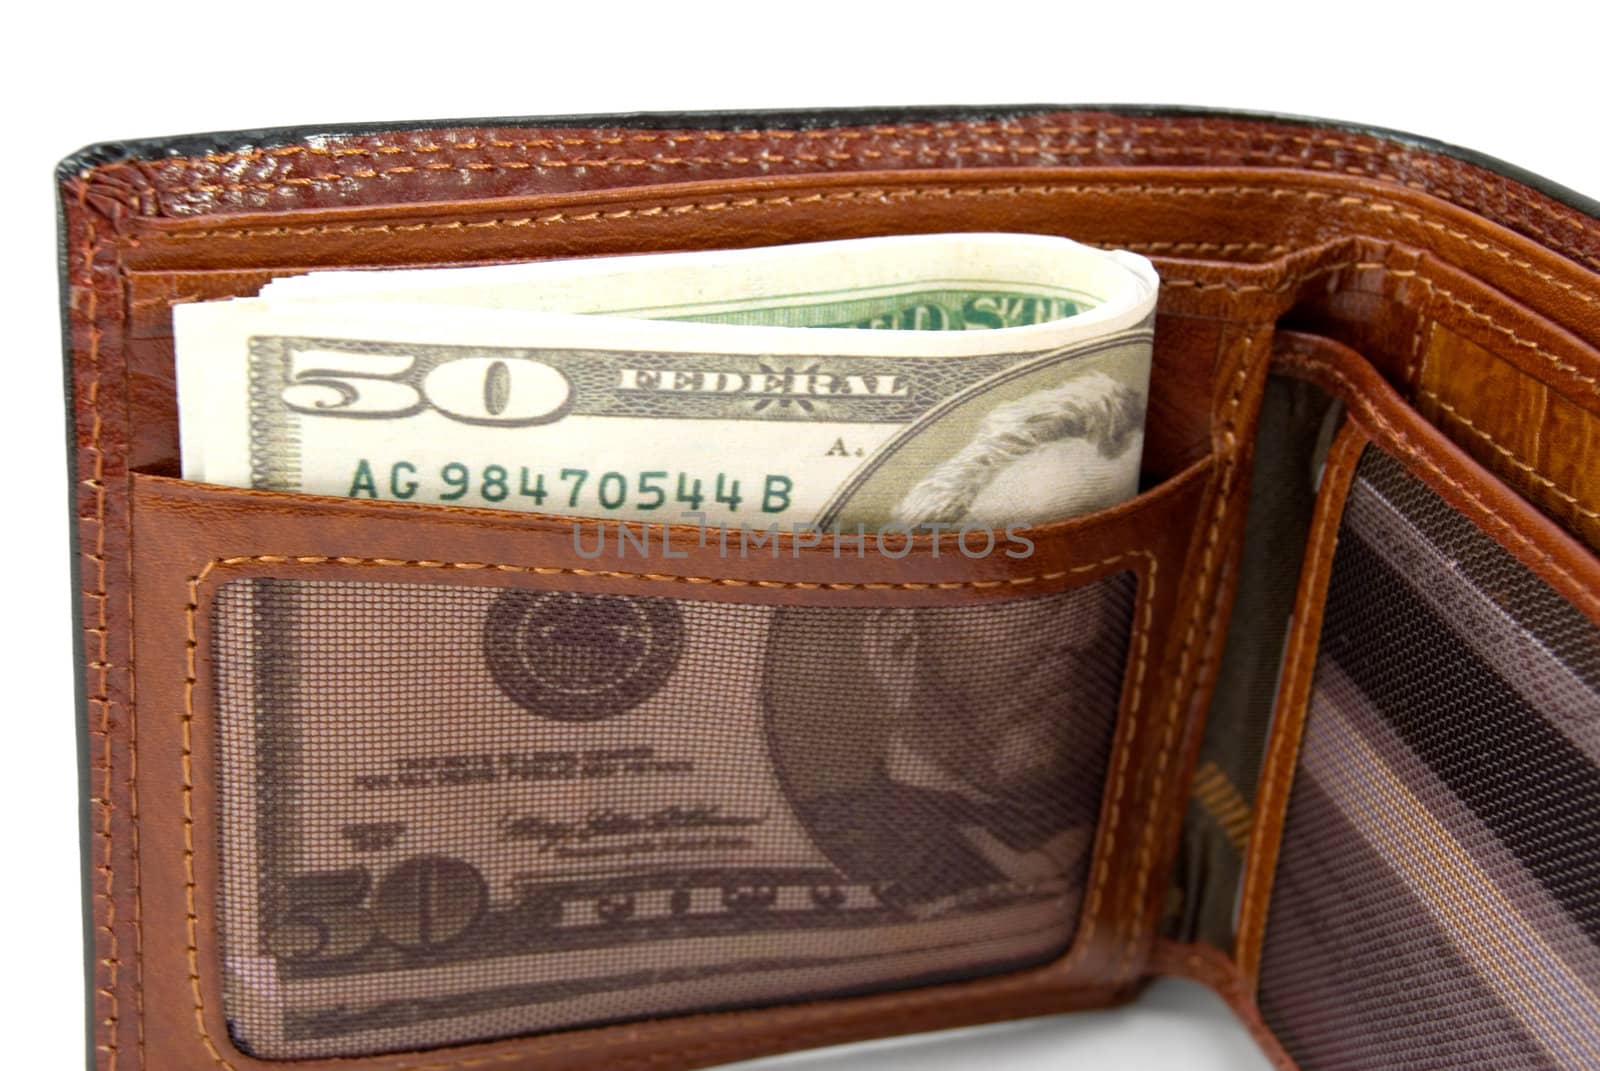 The brown purse with money is photographed a close-up